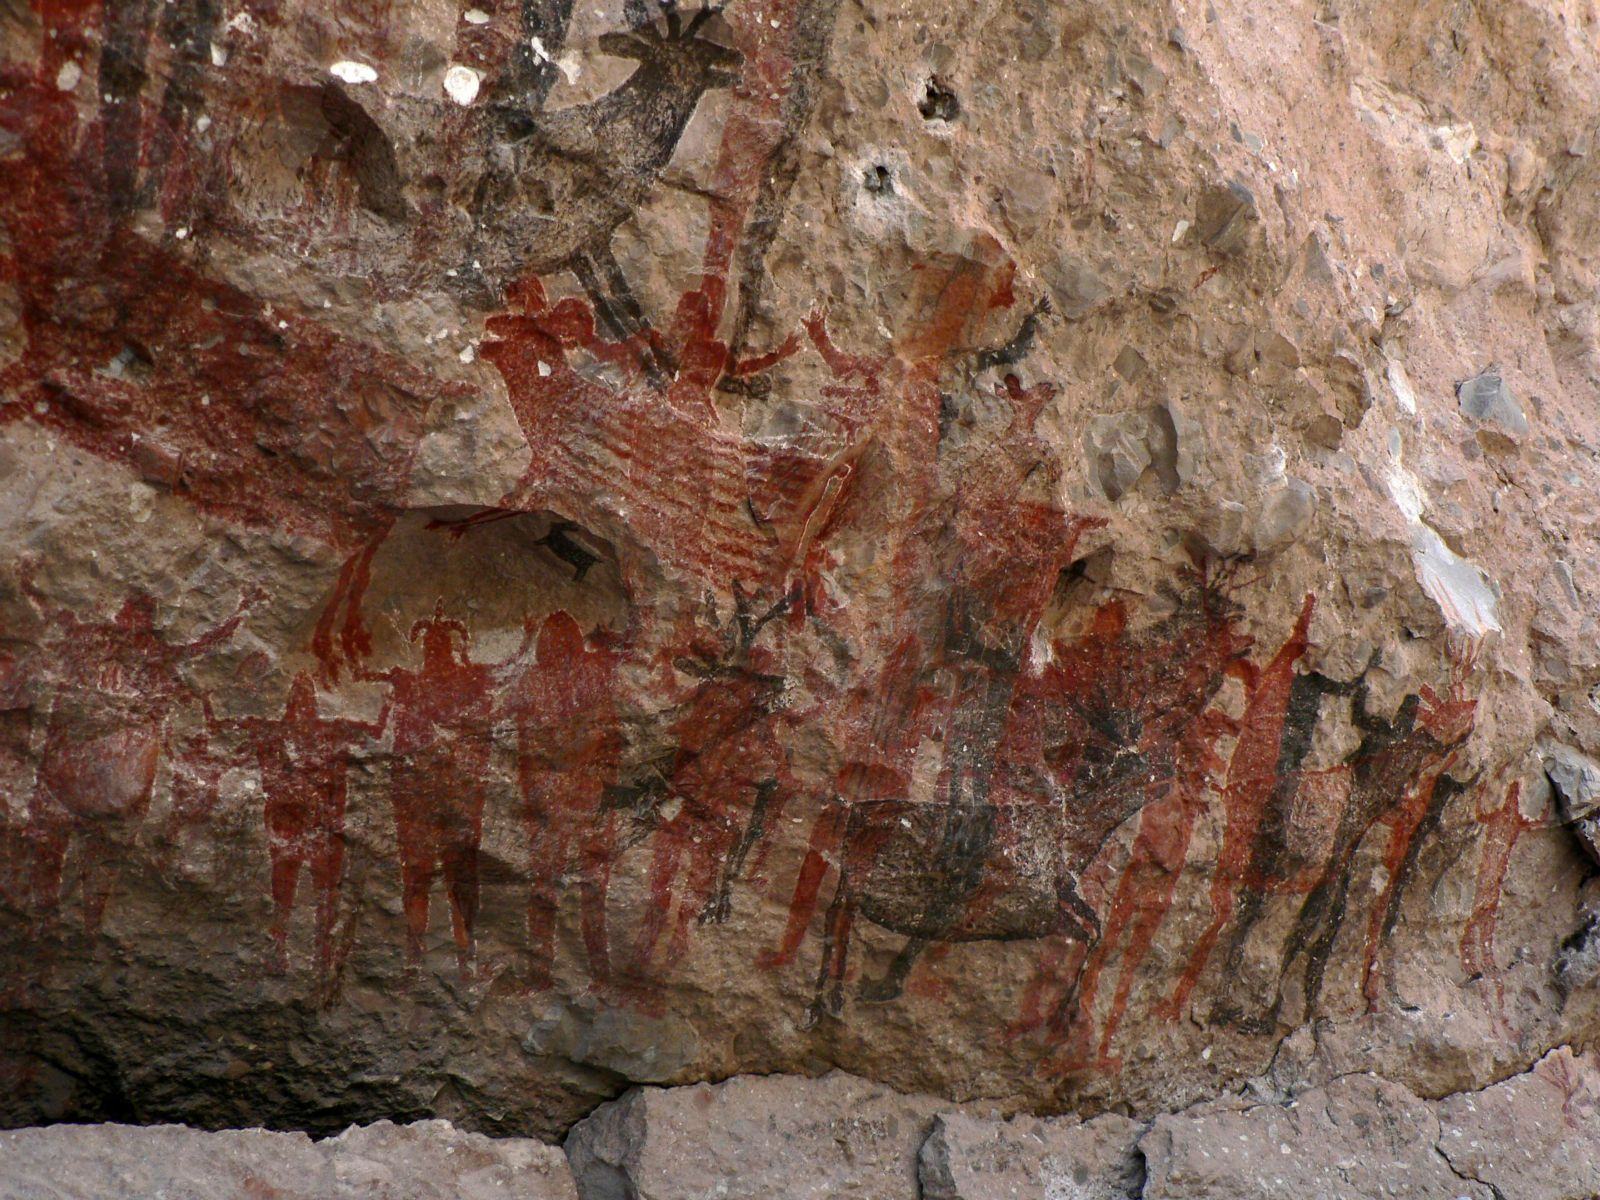 This image shows a portion of the famous South Gallery of Cueva Pintada.  Note the monos (human figures) at the bottom of the gallery.